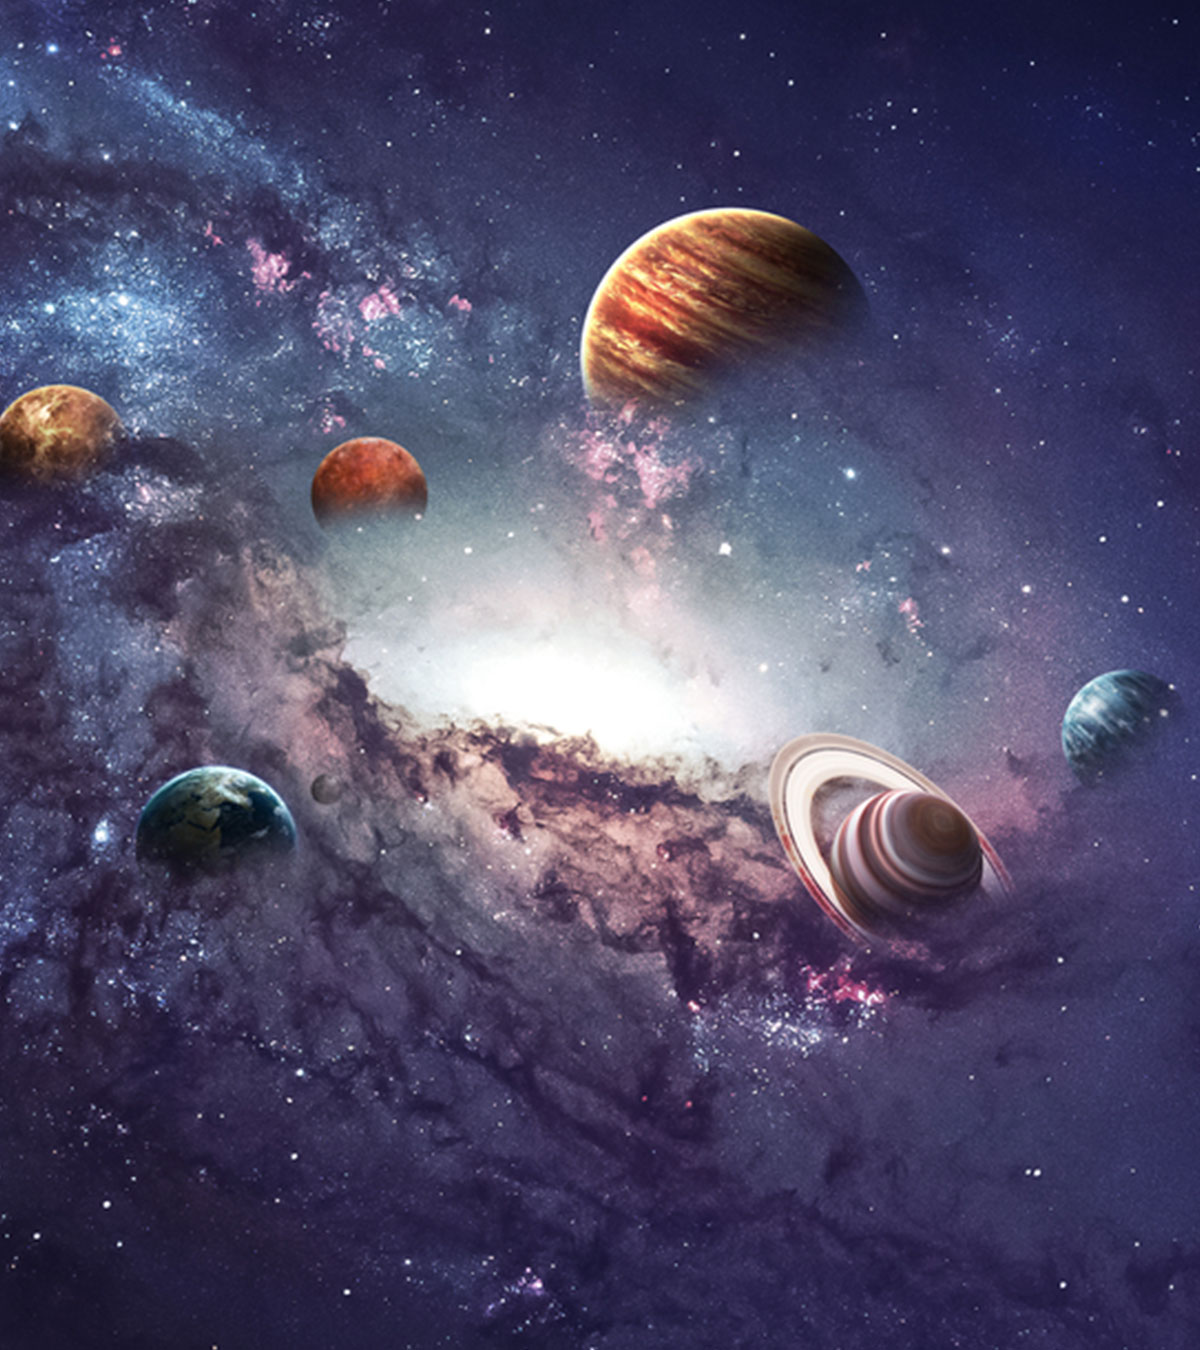 30 Intriguing And Fun Facts About Space For Kids